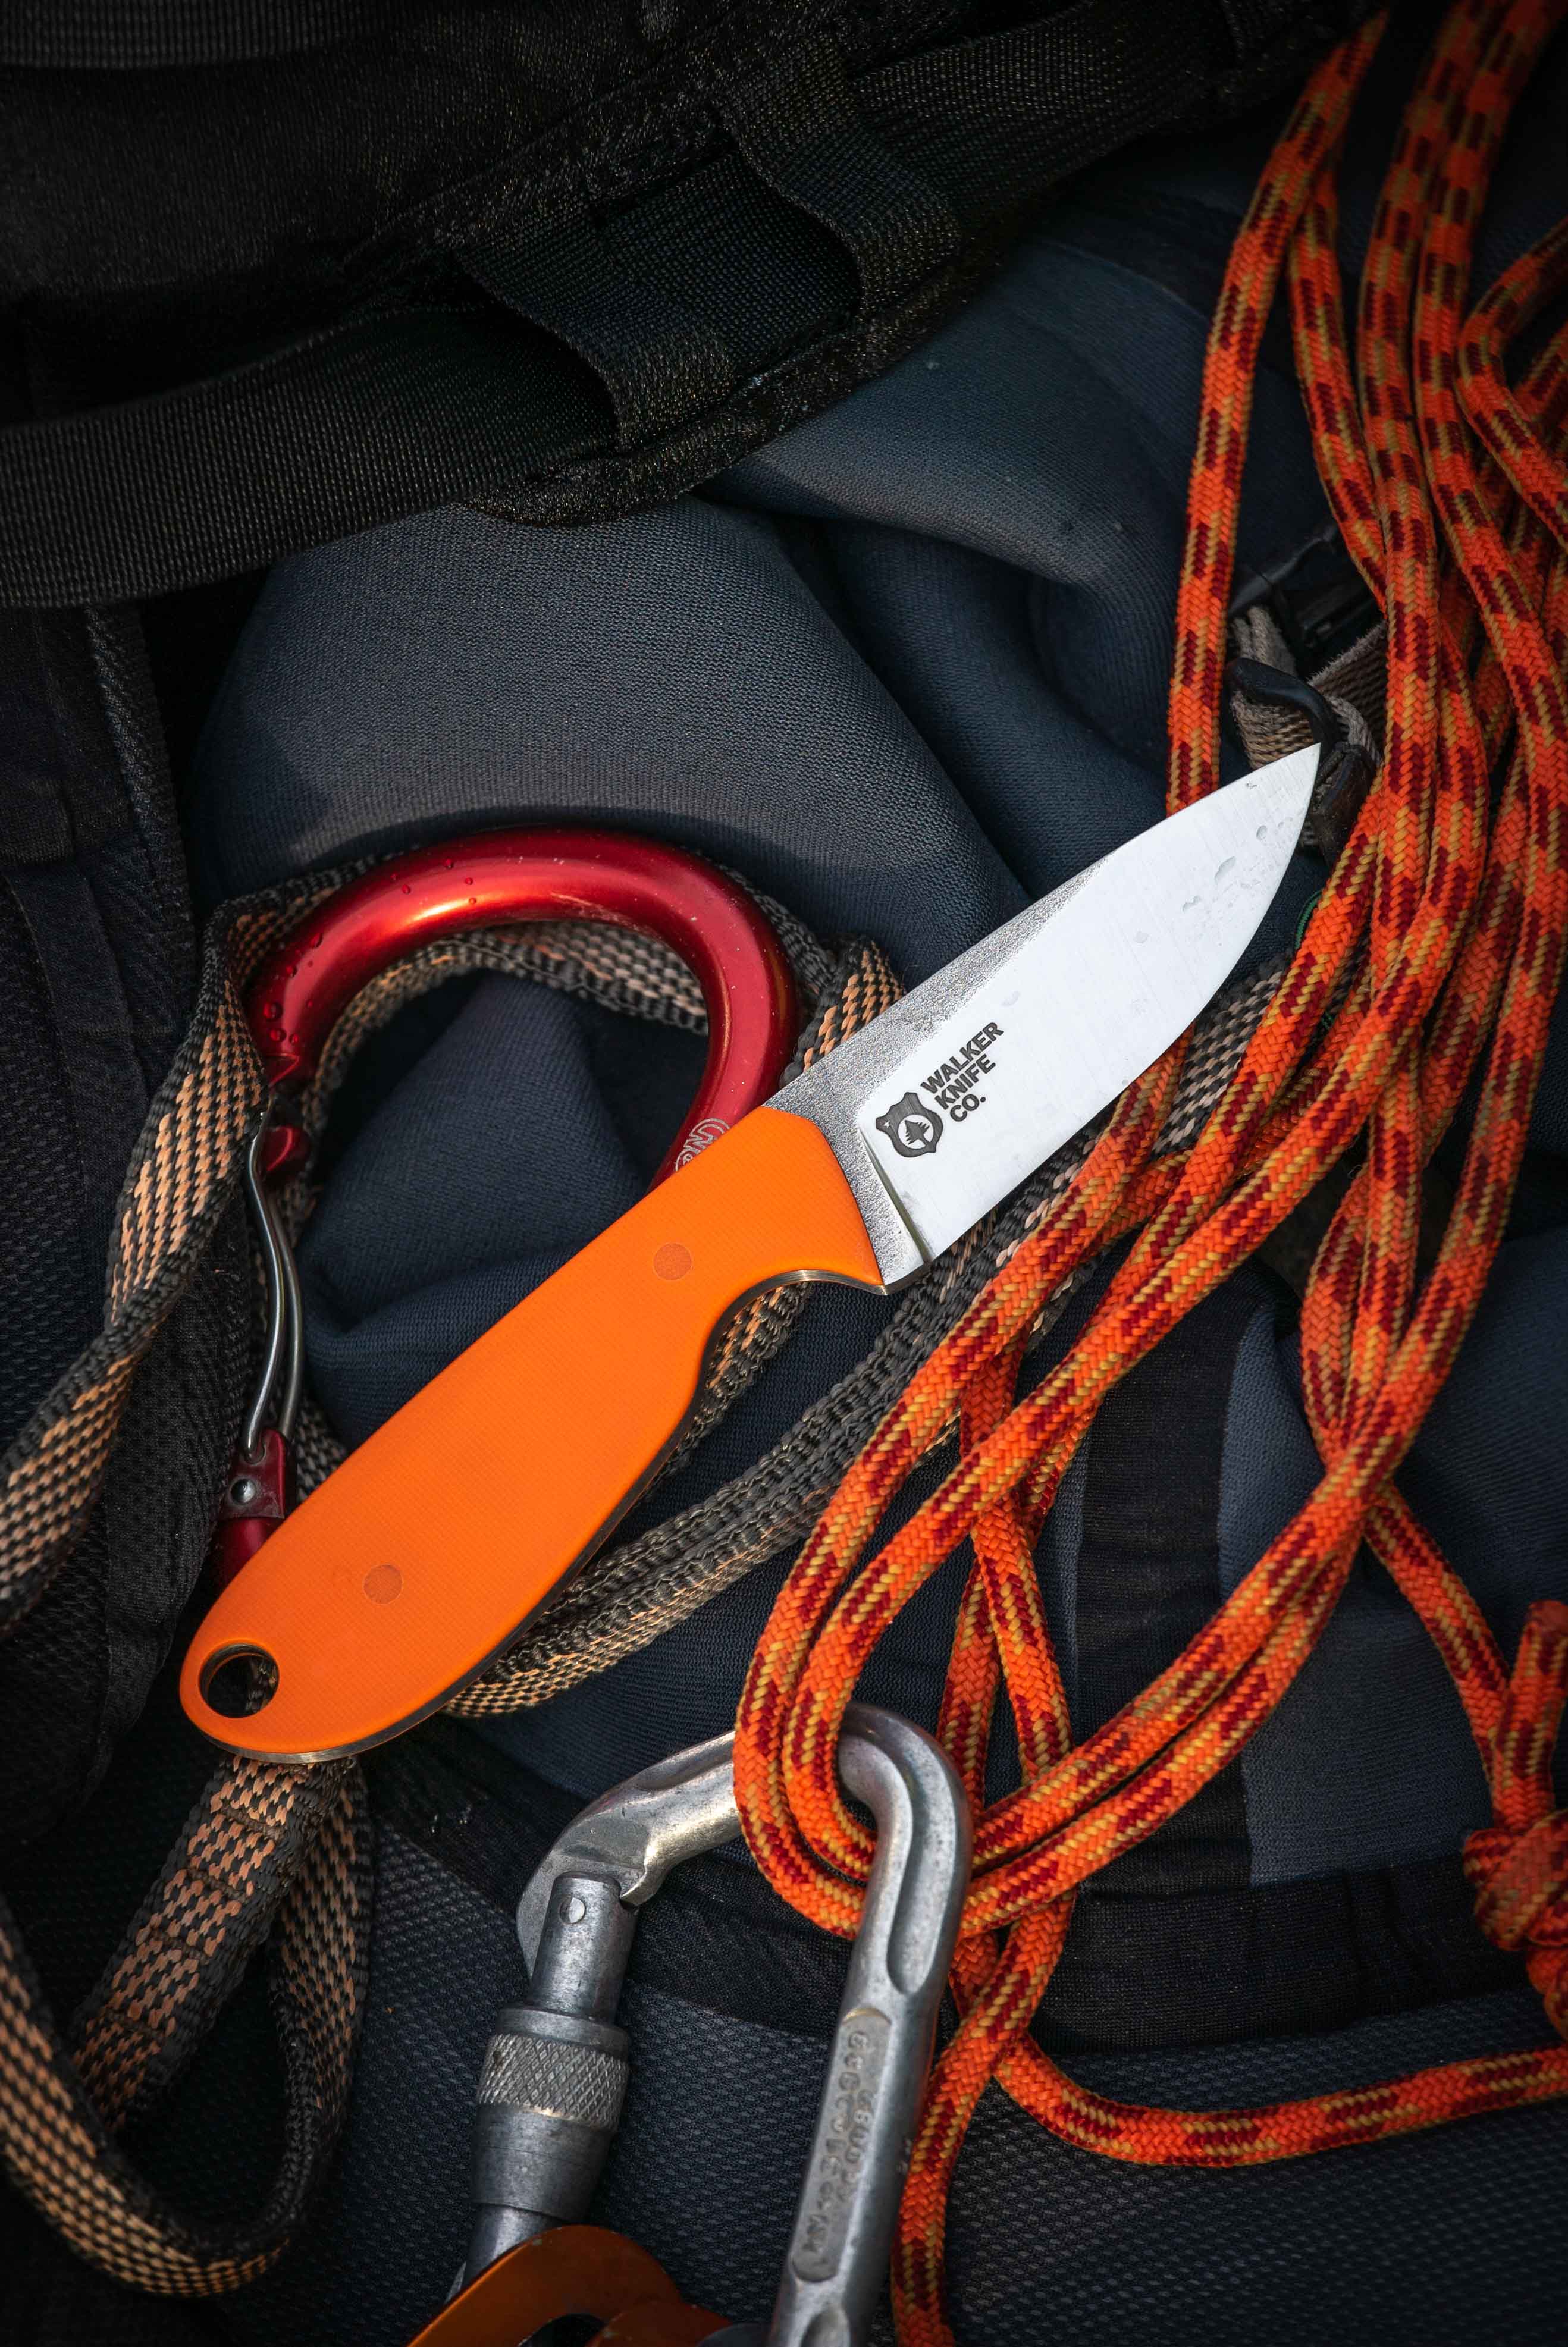 River knife for guides and rescue technicians with river gear